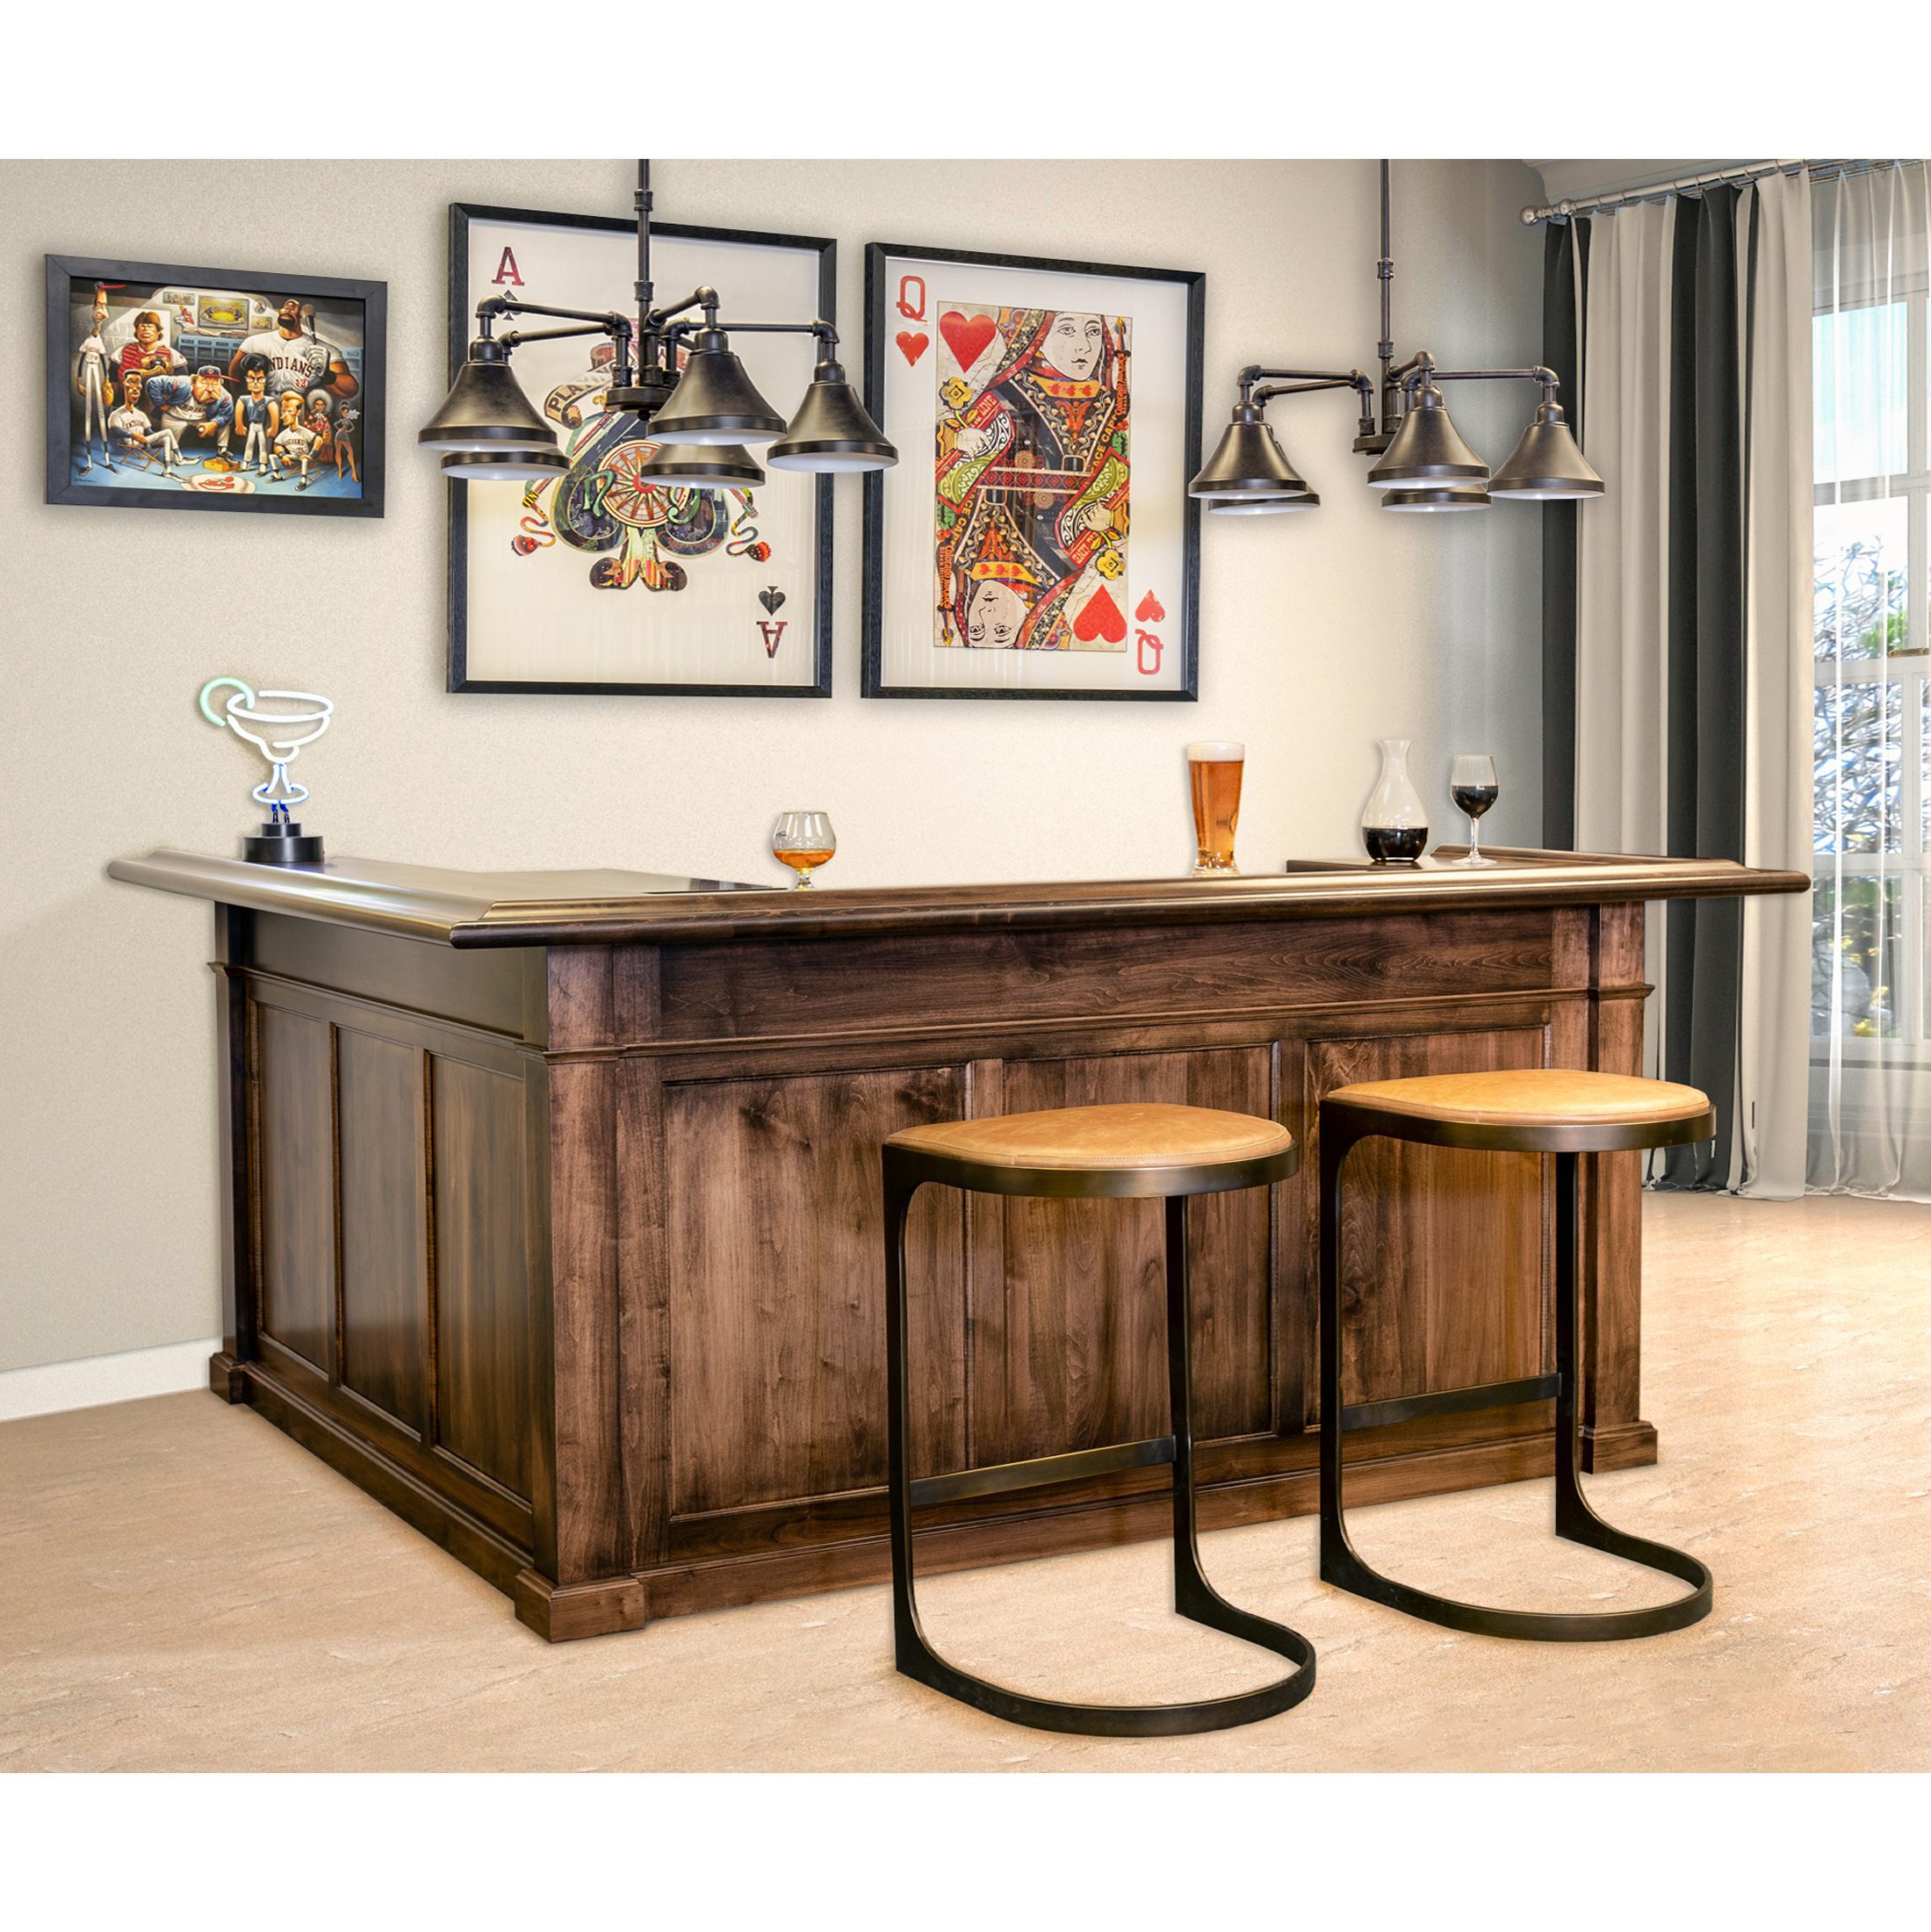 Modern Unique Home Bars for Large Space